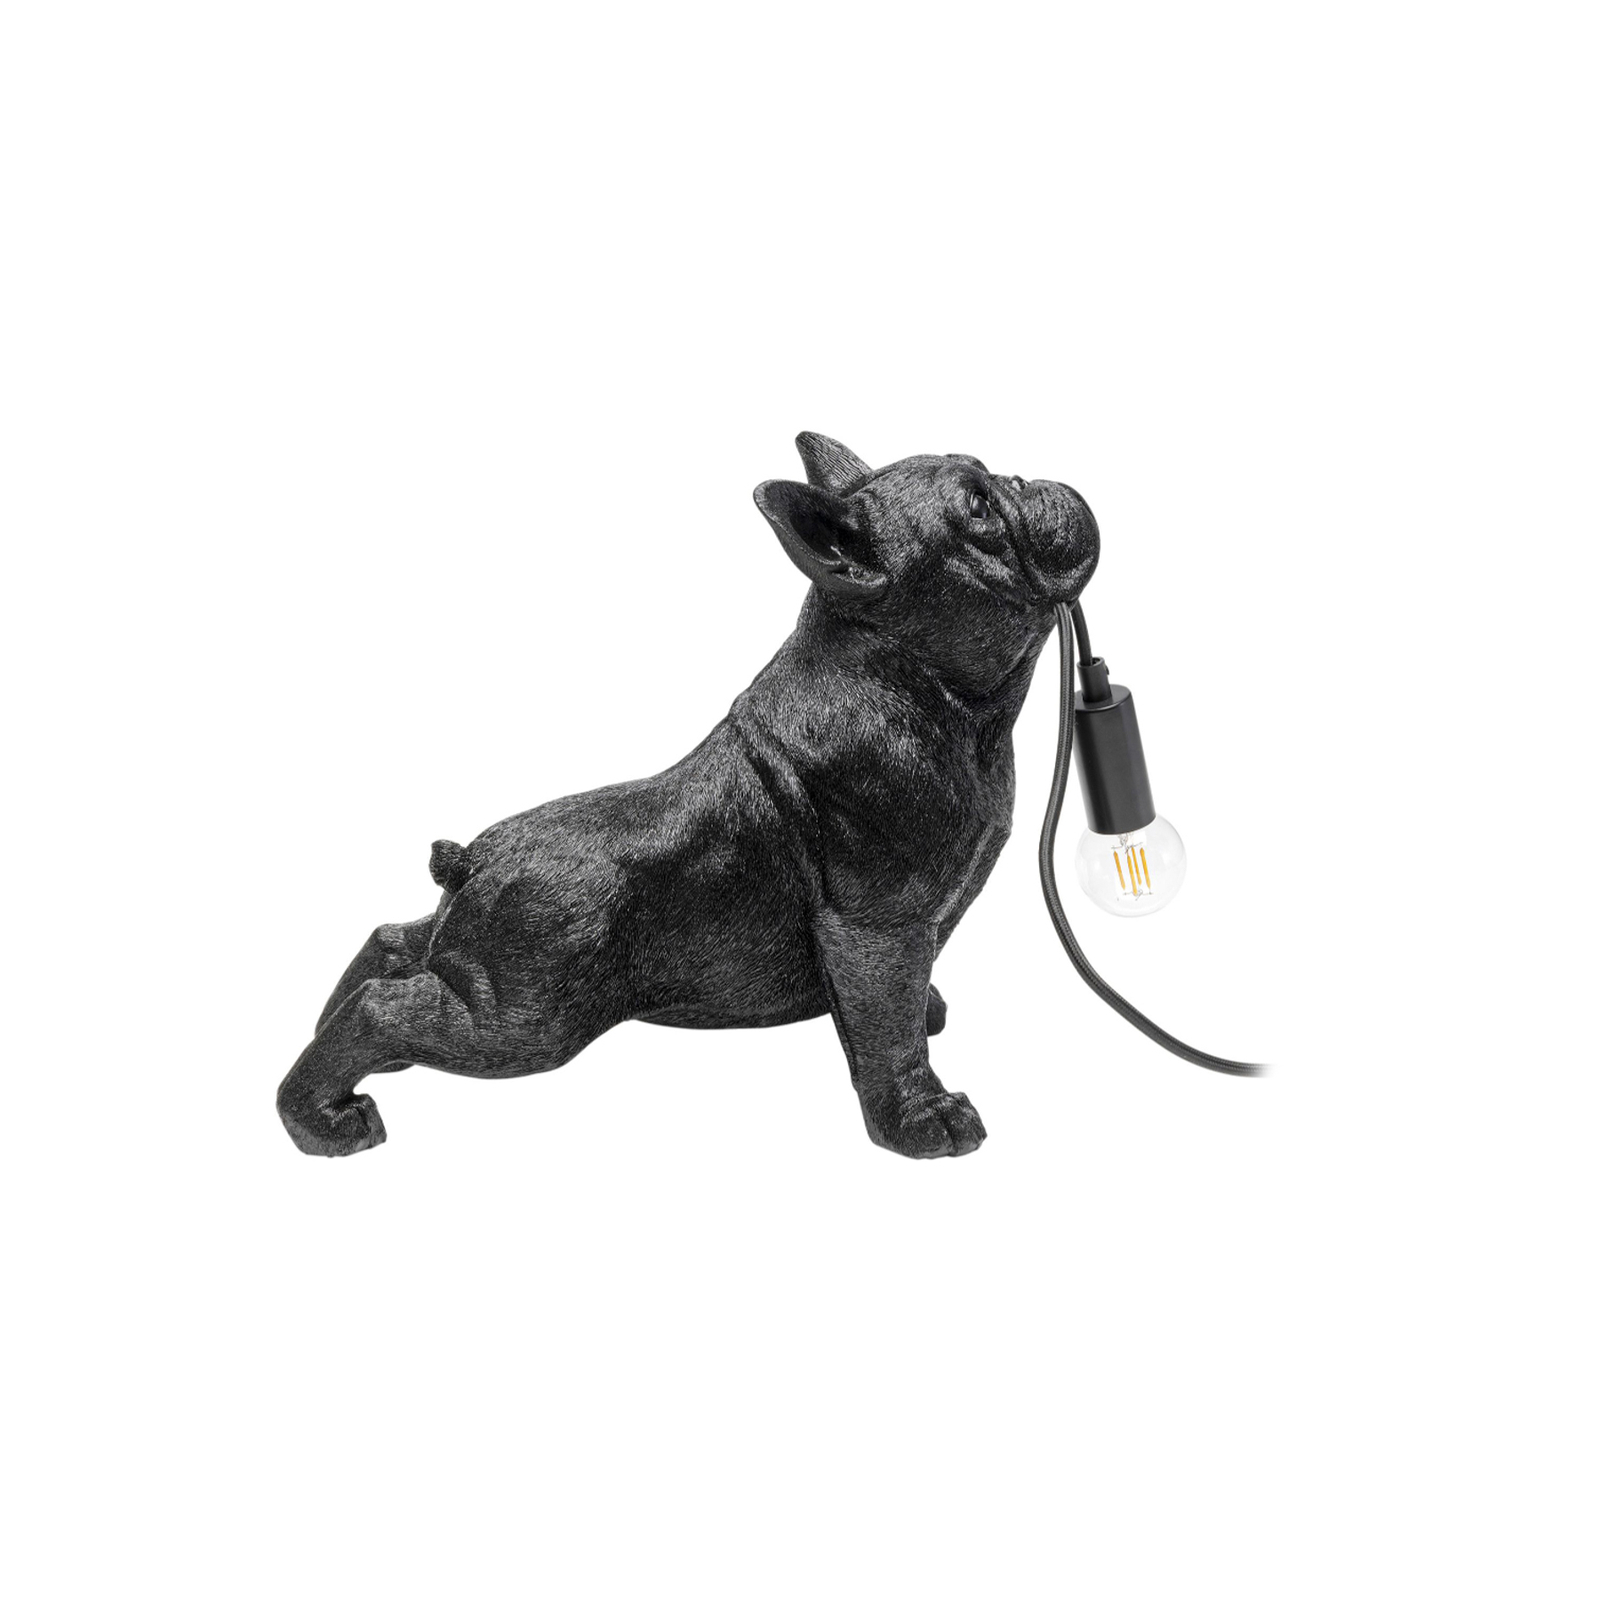 KARE table lamp Toto, black, synthetic resin, dog figure